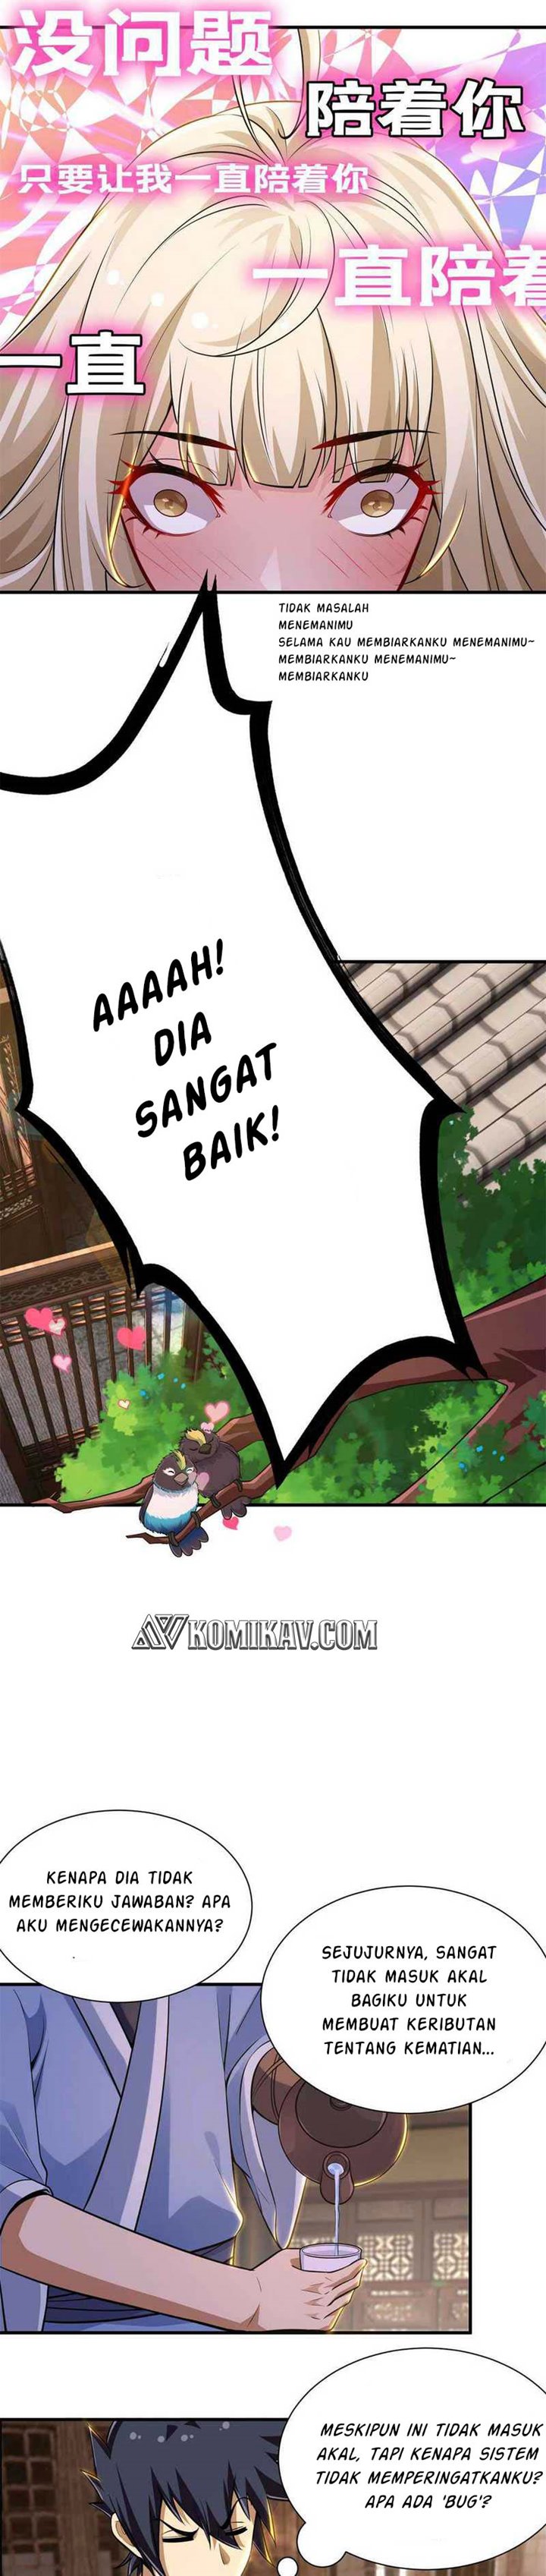 Dilarang COPAS - situs resmi www.mangacanblog.com - Komik i just want to be beaten to death by everyone 021 - chapter 21 22 Indonesia i just want to be beaten to death by everyone 021 - chapter 21 Terbaru 10|Baca Manga Komik Indonesia|Mangacan